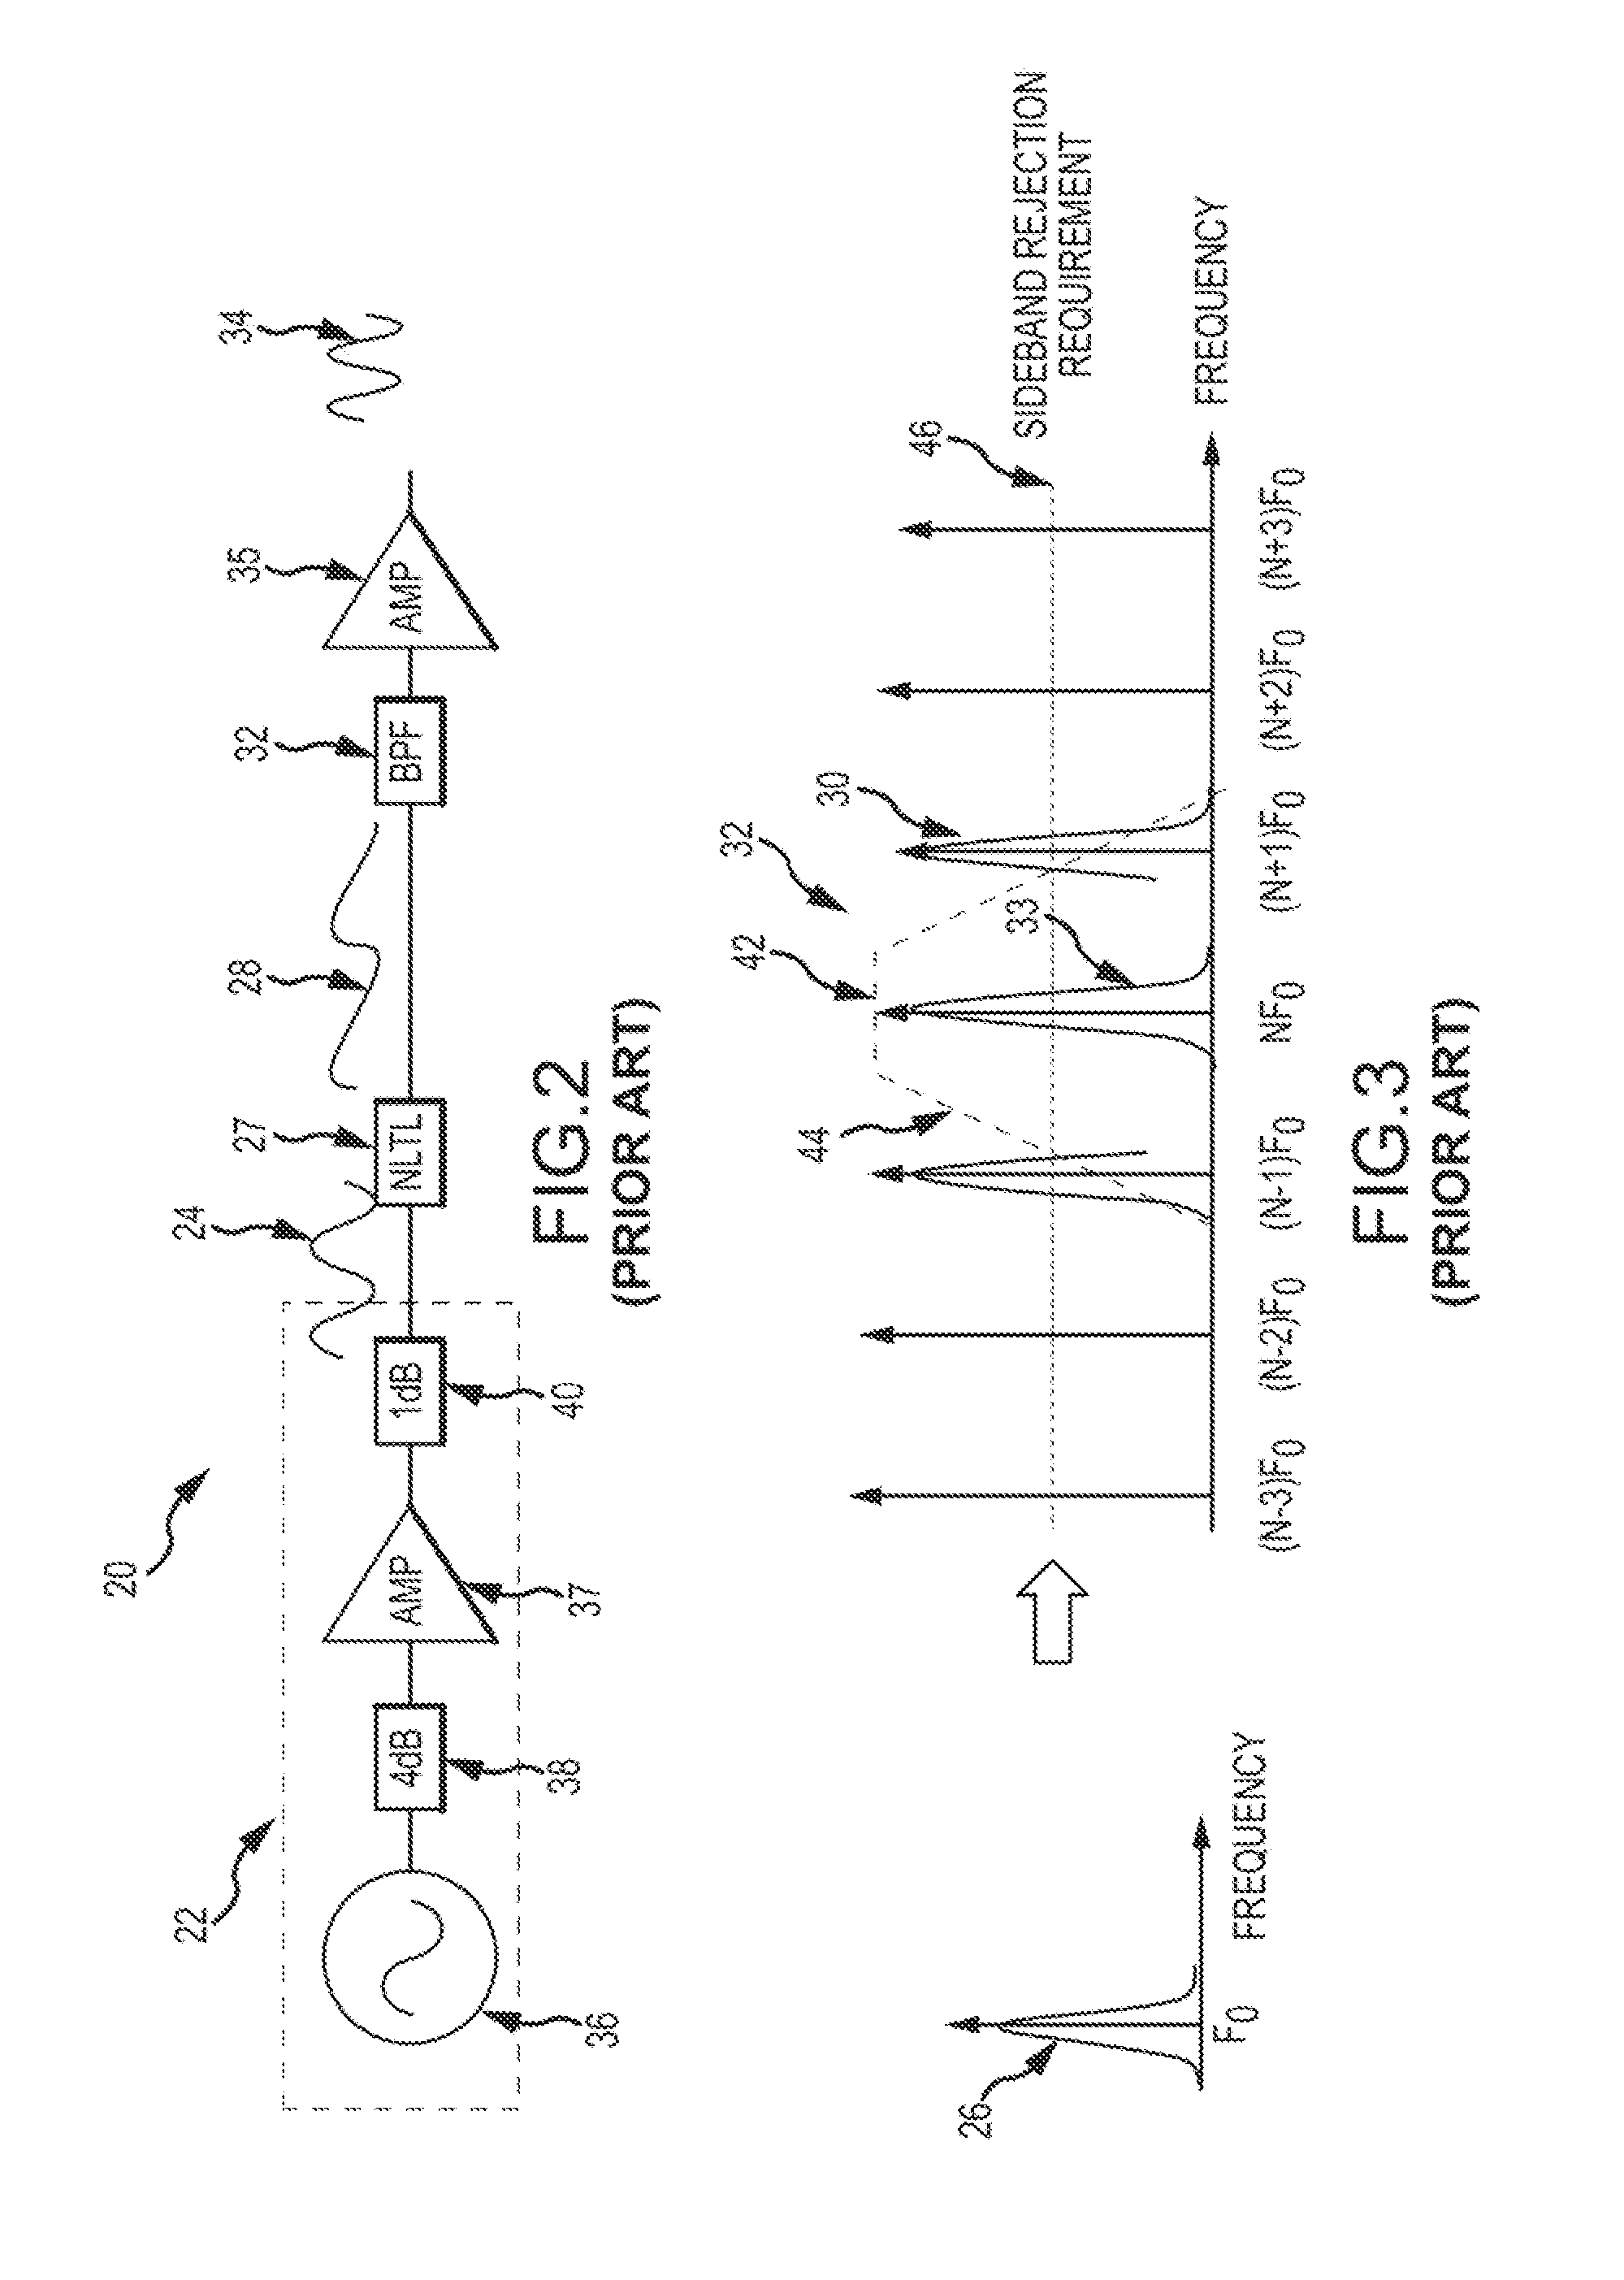 Noise reduction for non-linear transmission line (NLTL) frequency multiplier